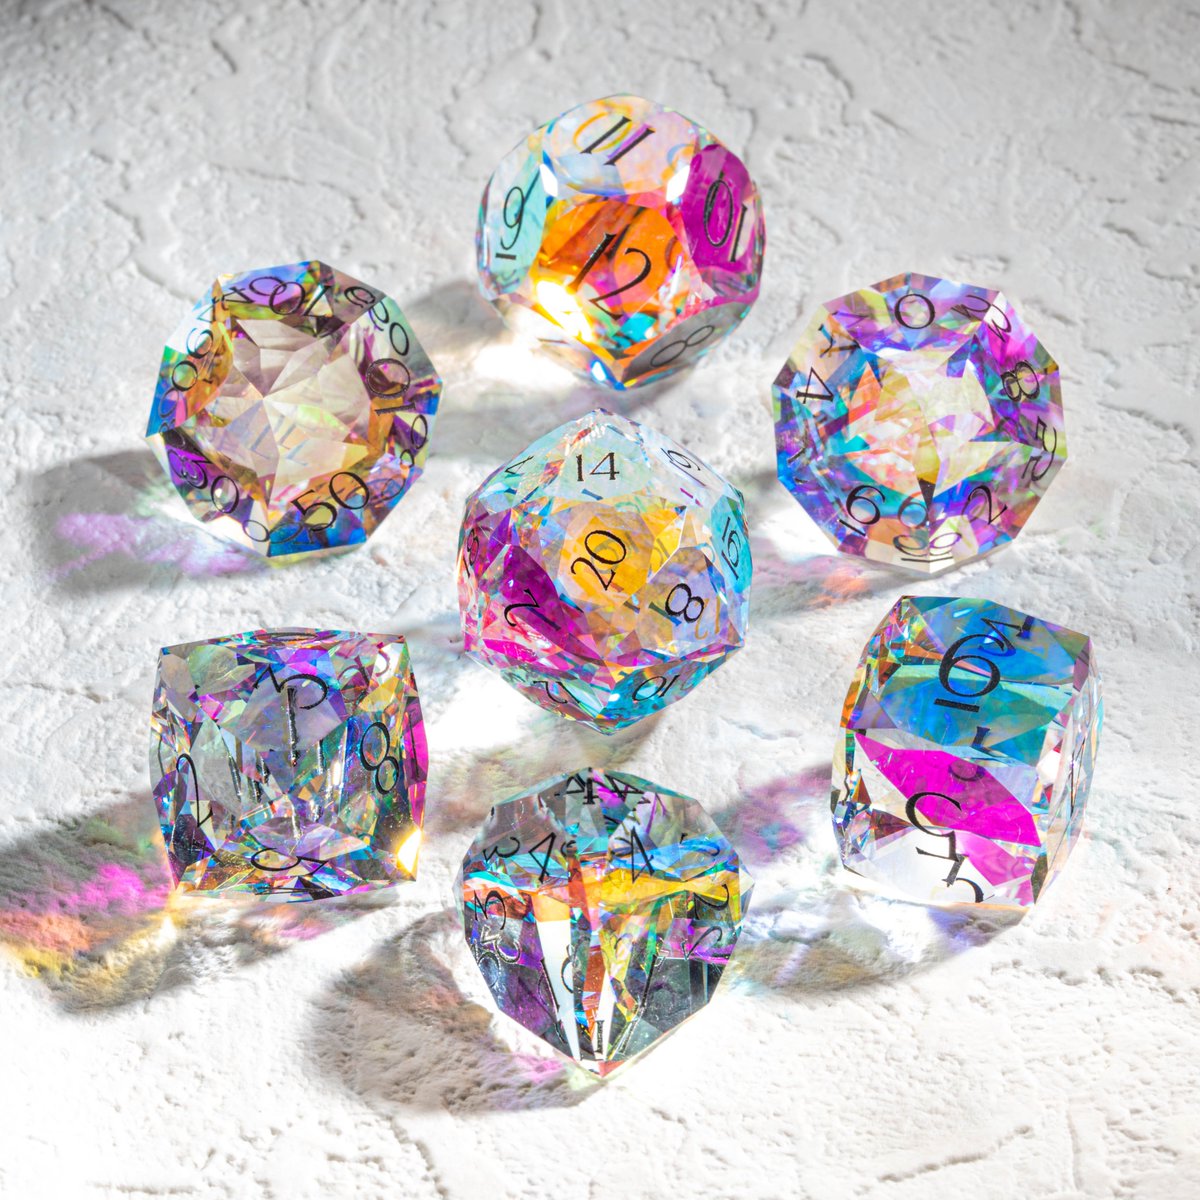 ✨𝙇𝙖𝙪𝙣𝙘𝙝𝙞𝙣𝙜 𝙨𝙤𝙤𝙣 𝙤𝙣 𝙆𝙞𝙘𝙠𝙨𝙩𝙖𝙧𝙩𝙚𝙧✨ This is our glass dice that will soon be launched on @Kickstarter, crafted with diamond cutting techniques to ensure its dazzling brilliance. 💎 Does everyone like it? #dnd #dnddice #dnddiceset #handmadedice #gemdice…